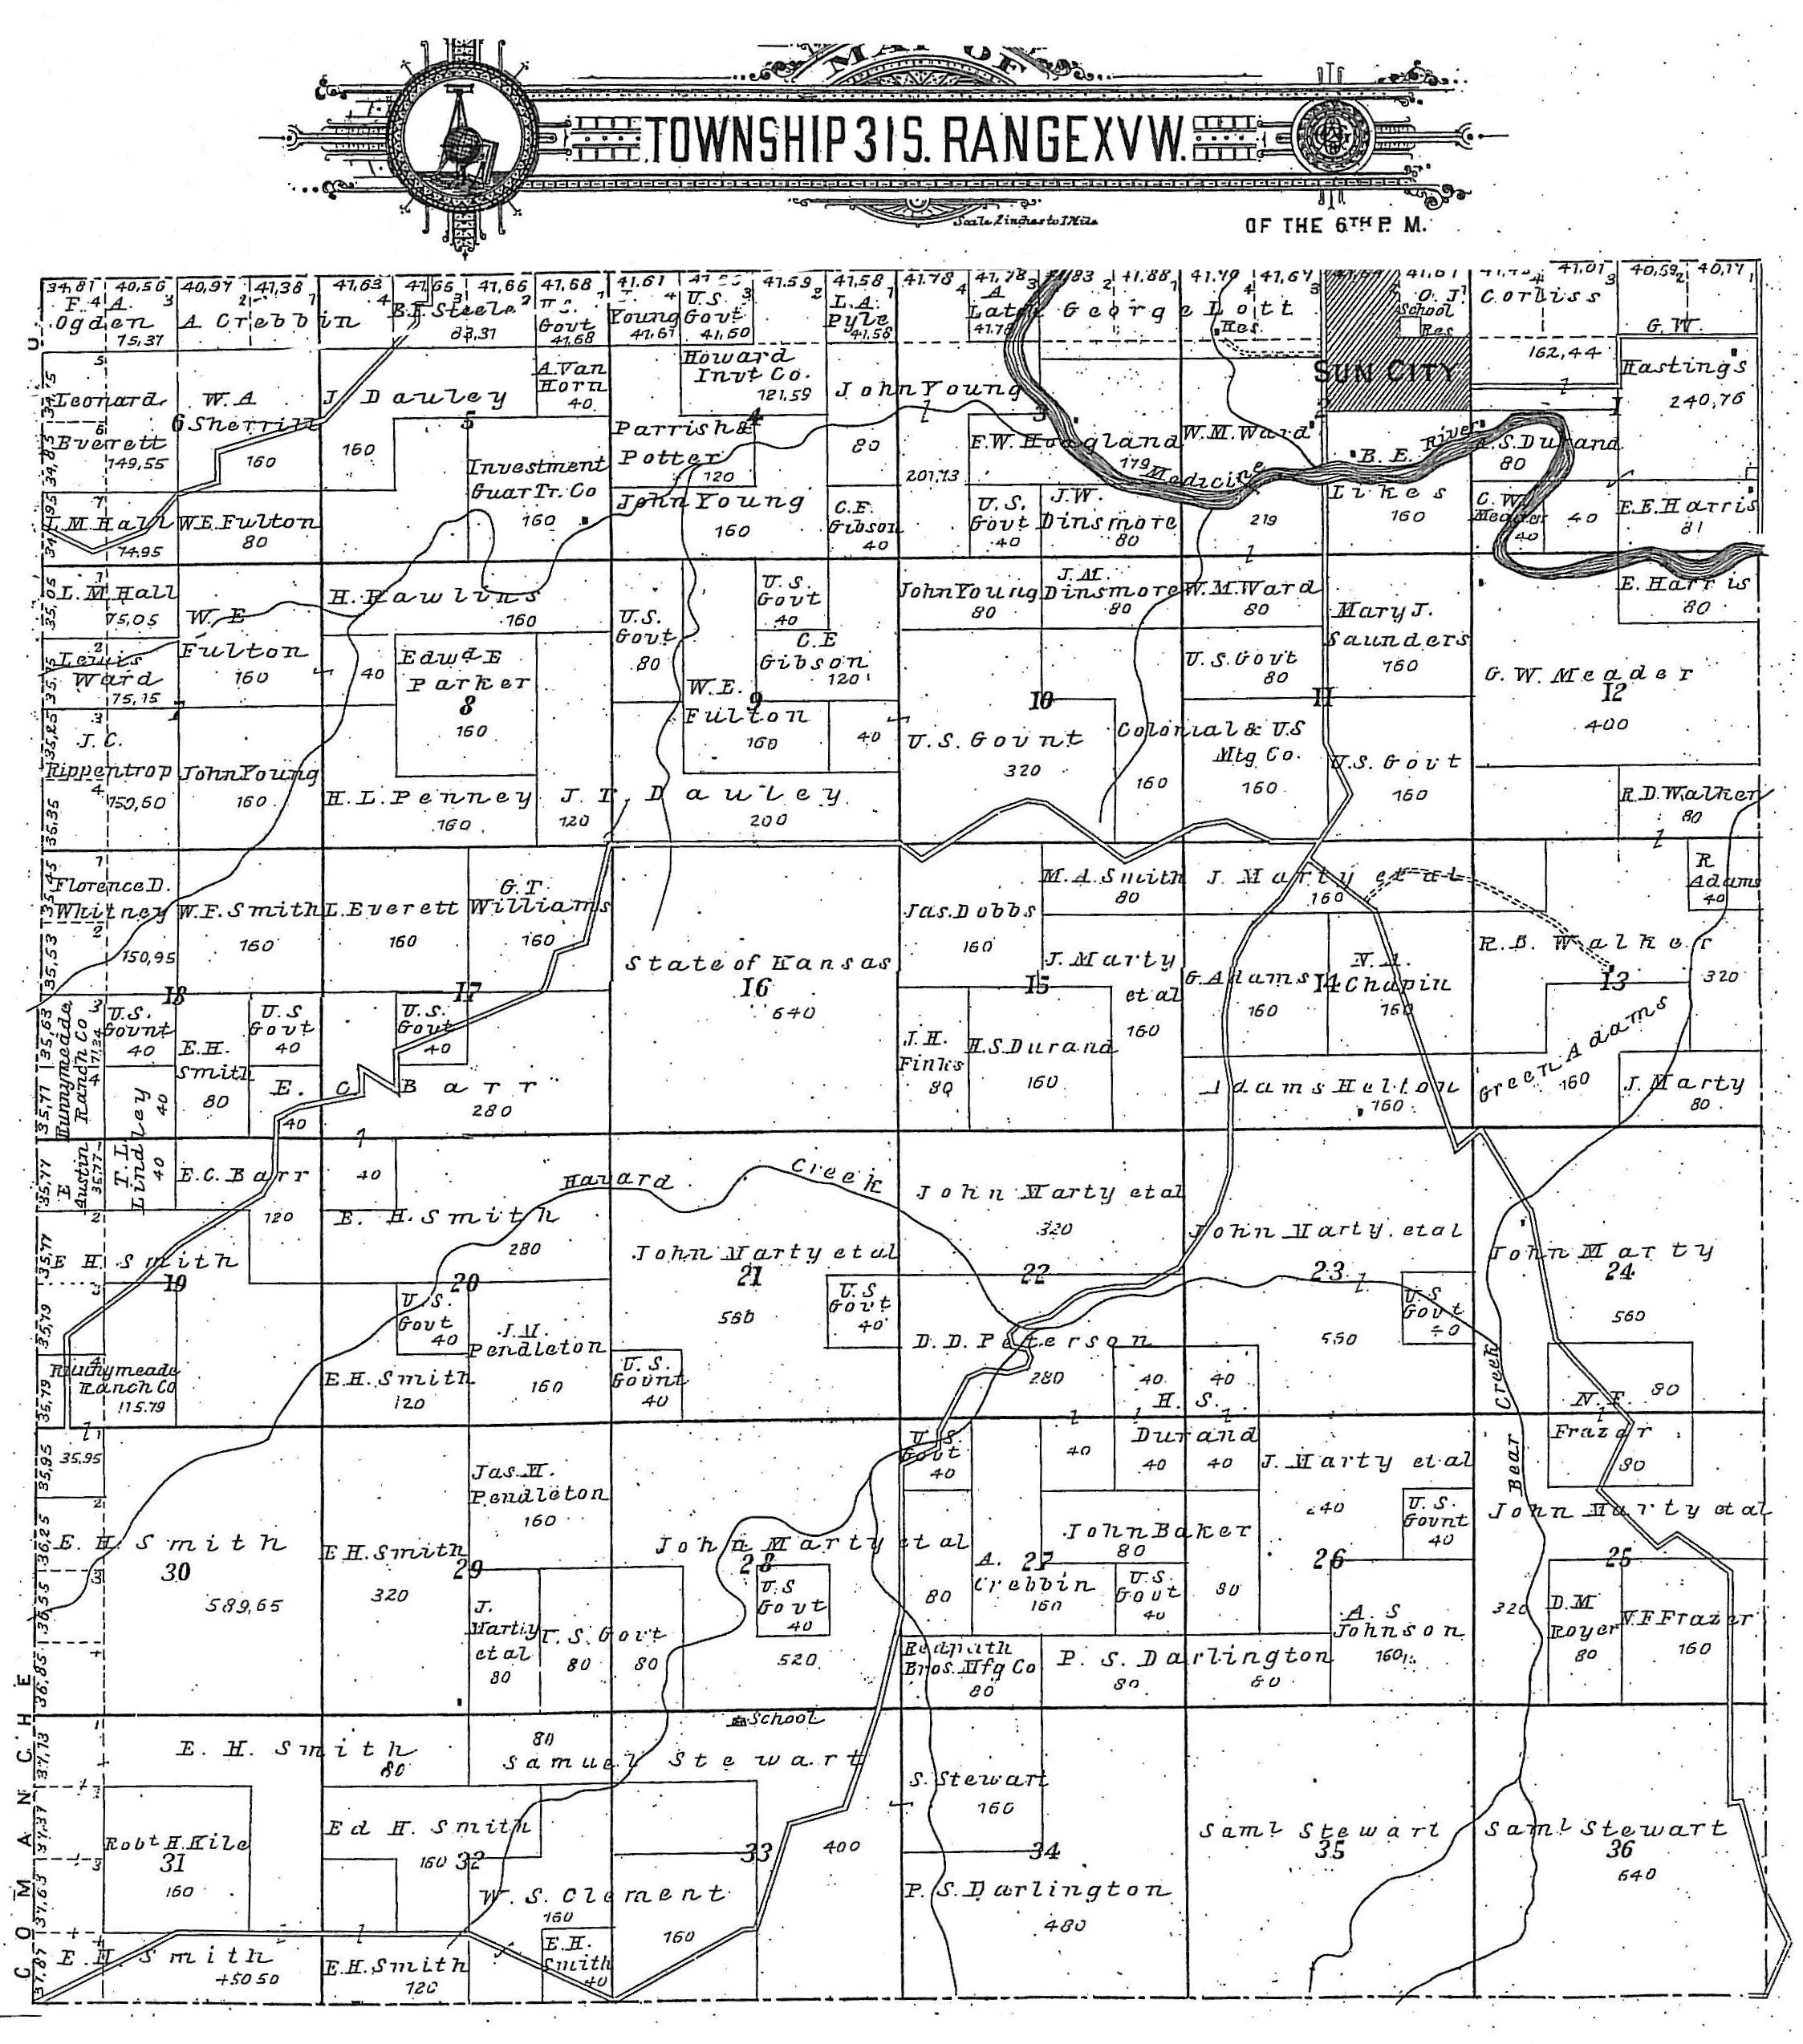 Township 31 S., Range XV West of the 6th P.M., G.A. Ogle 1905 Map, Barber County, Kansas.

Map courtesy of Kimberly (Hoagland) Fowles.